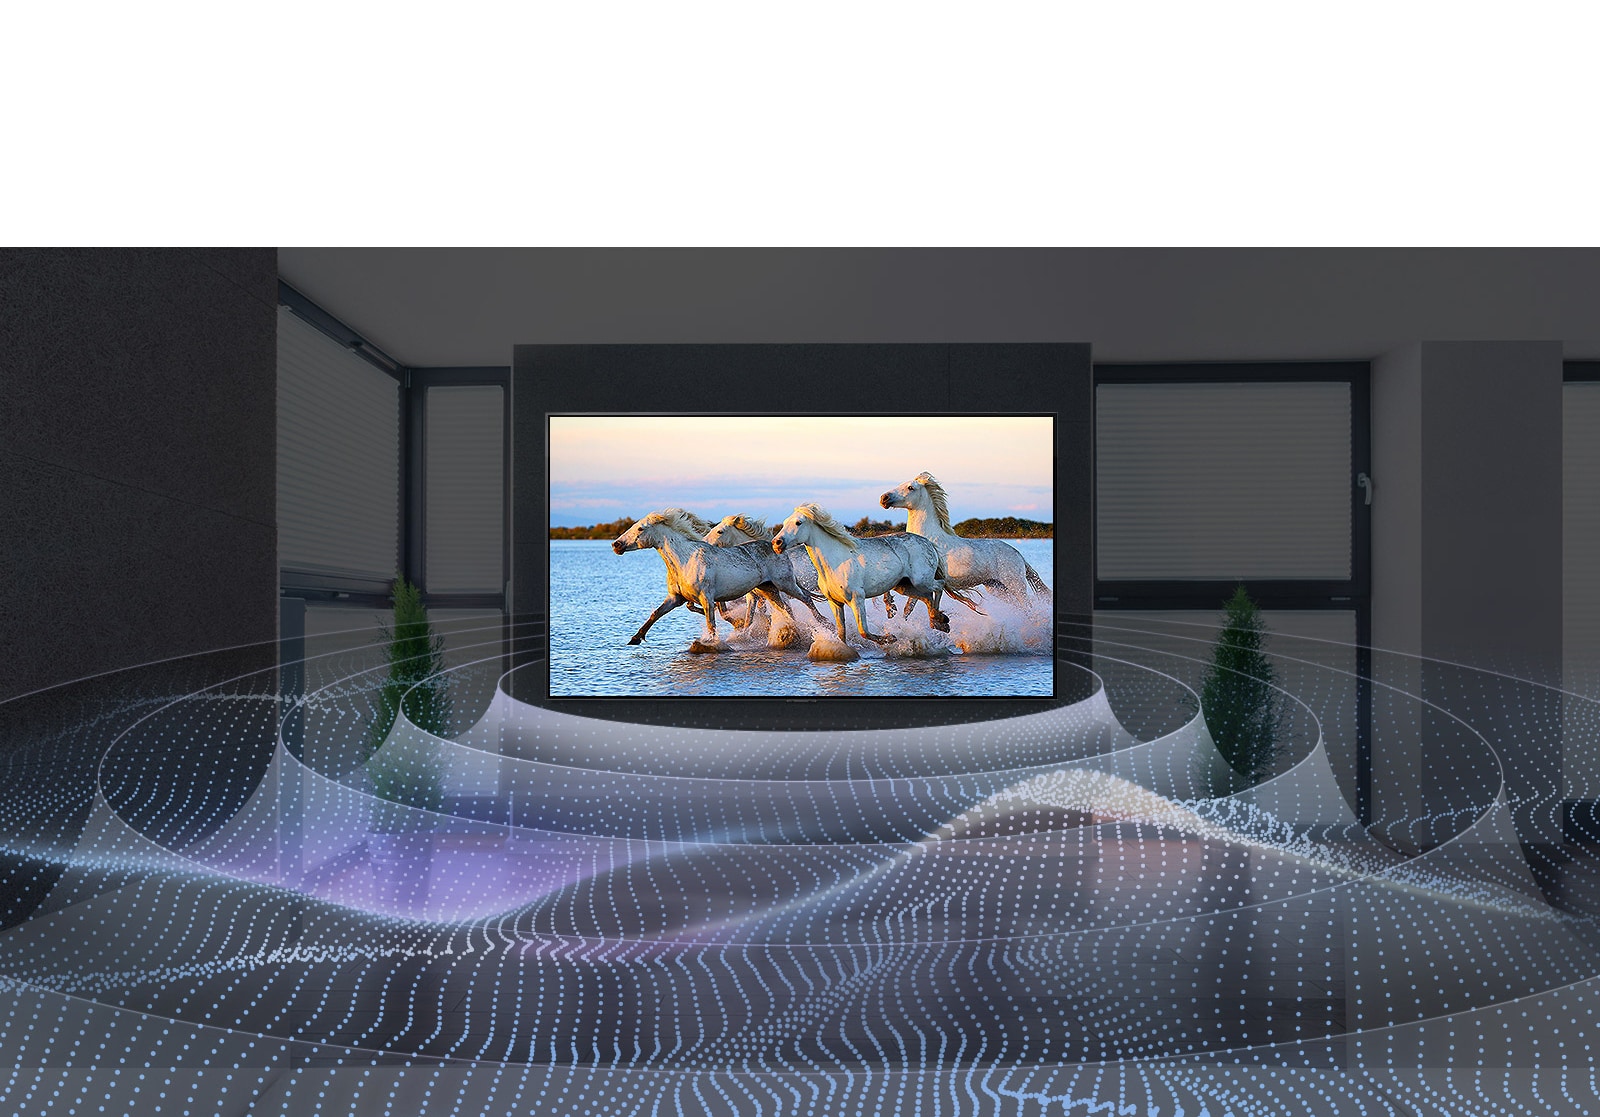 Four white horses running in the water on TV with surround sound graphic